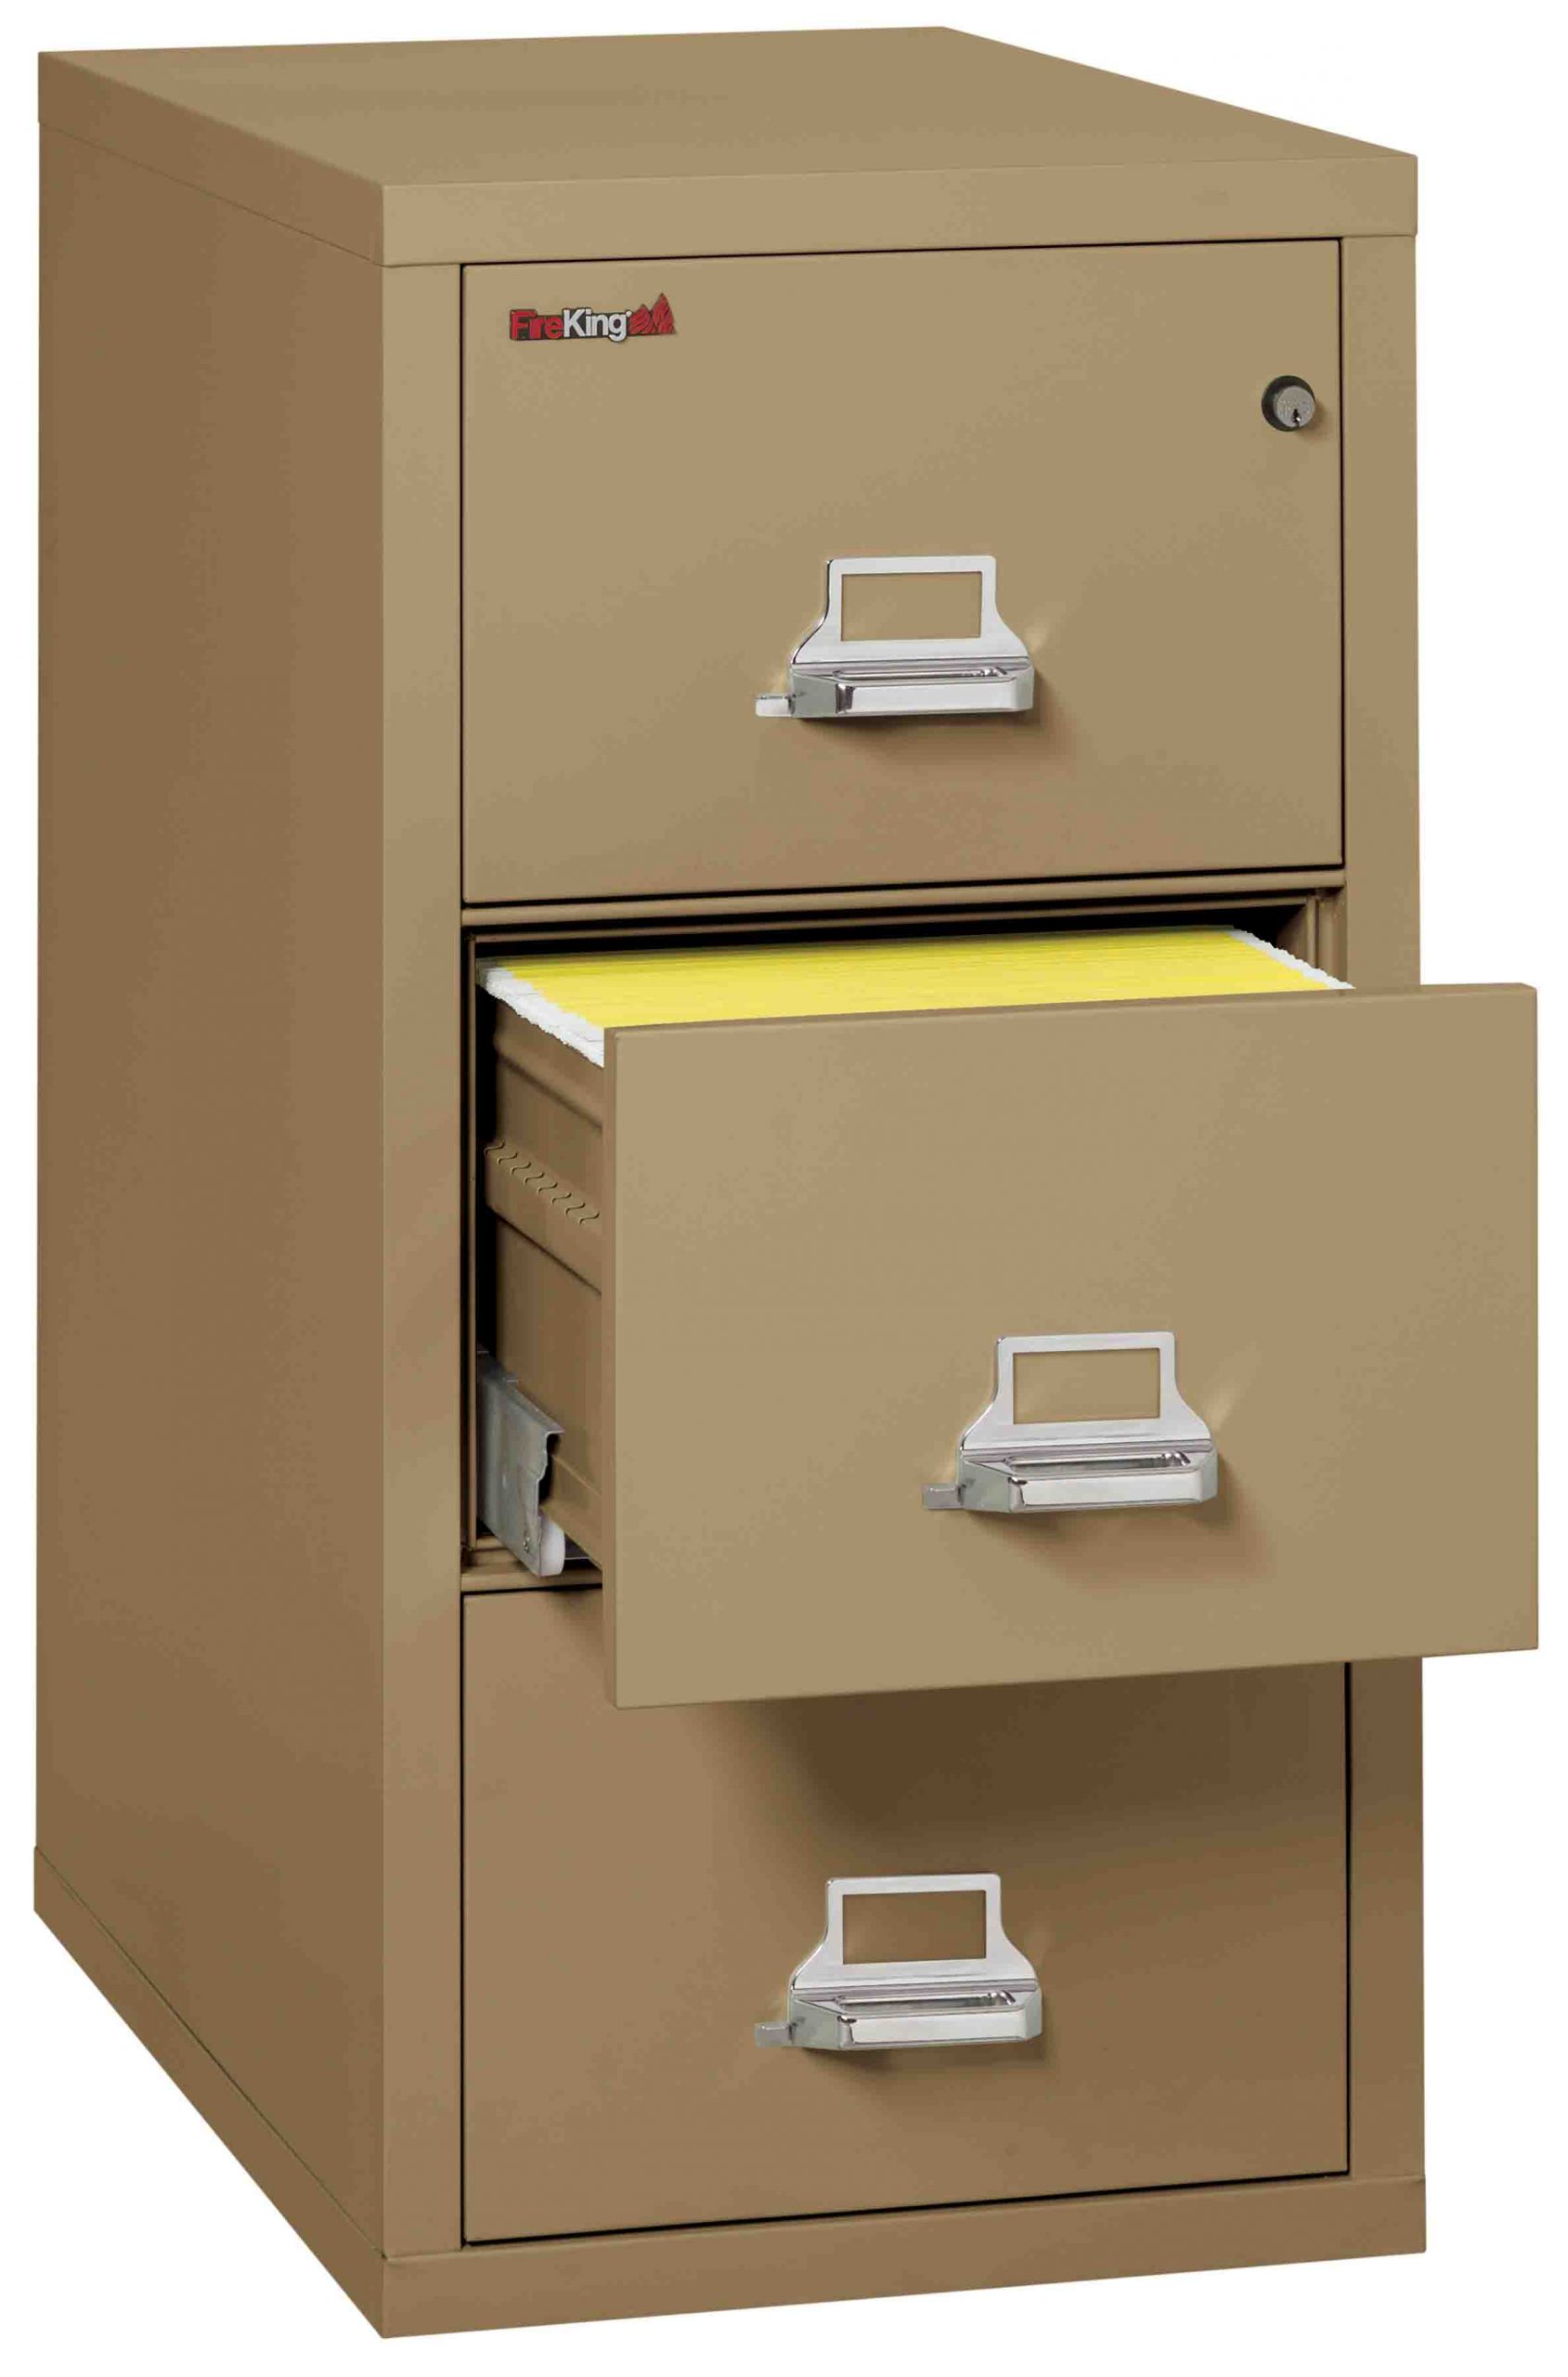 Fire King 3-2131-C - Vertical Fireproof File Cabinets - 3 Drawer 1 Hour Fire Rating